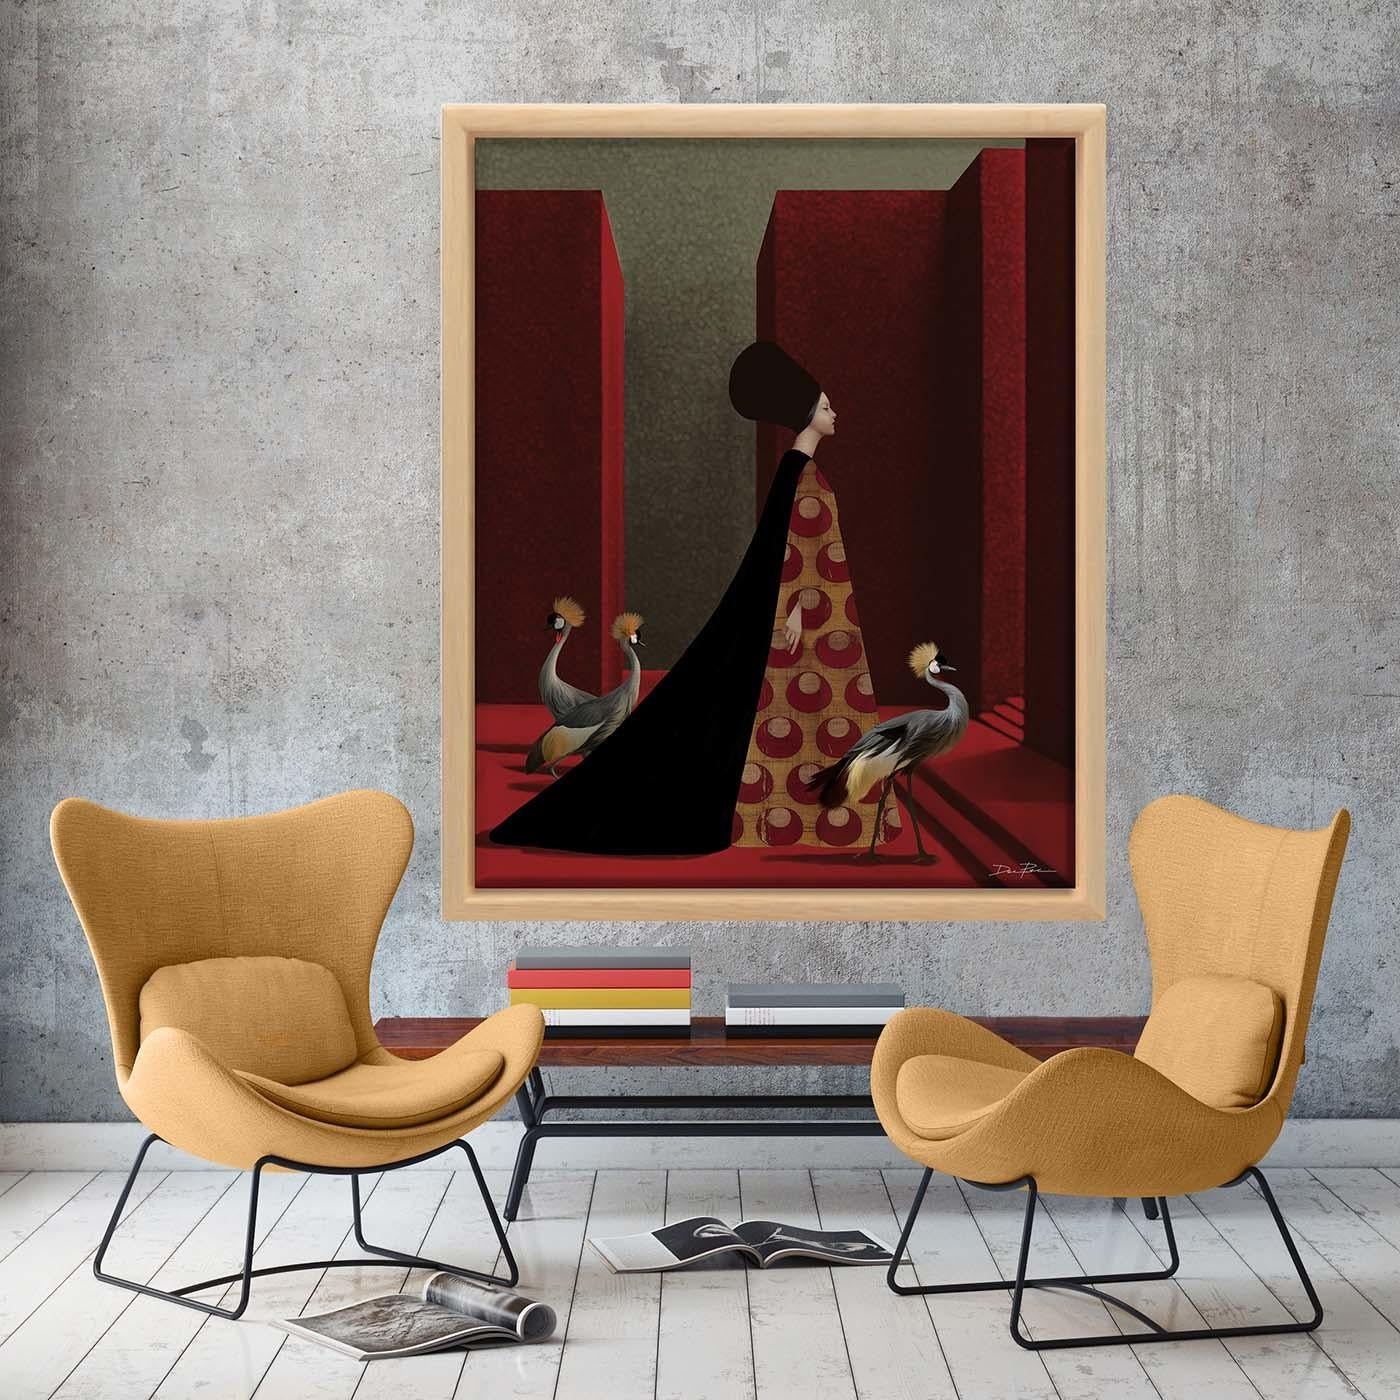 Female sacredness is recurrent in this artist's pop-surrealist works. The splendid priestess crosses the metaphysical architecture of her palace, embodying the archaic mystery of femininity. On a panel of fine cotton pictorial canvas, the piece is